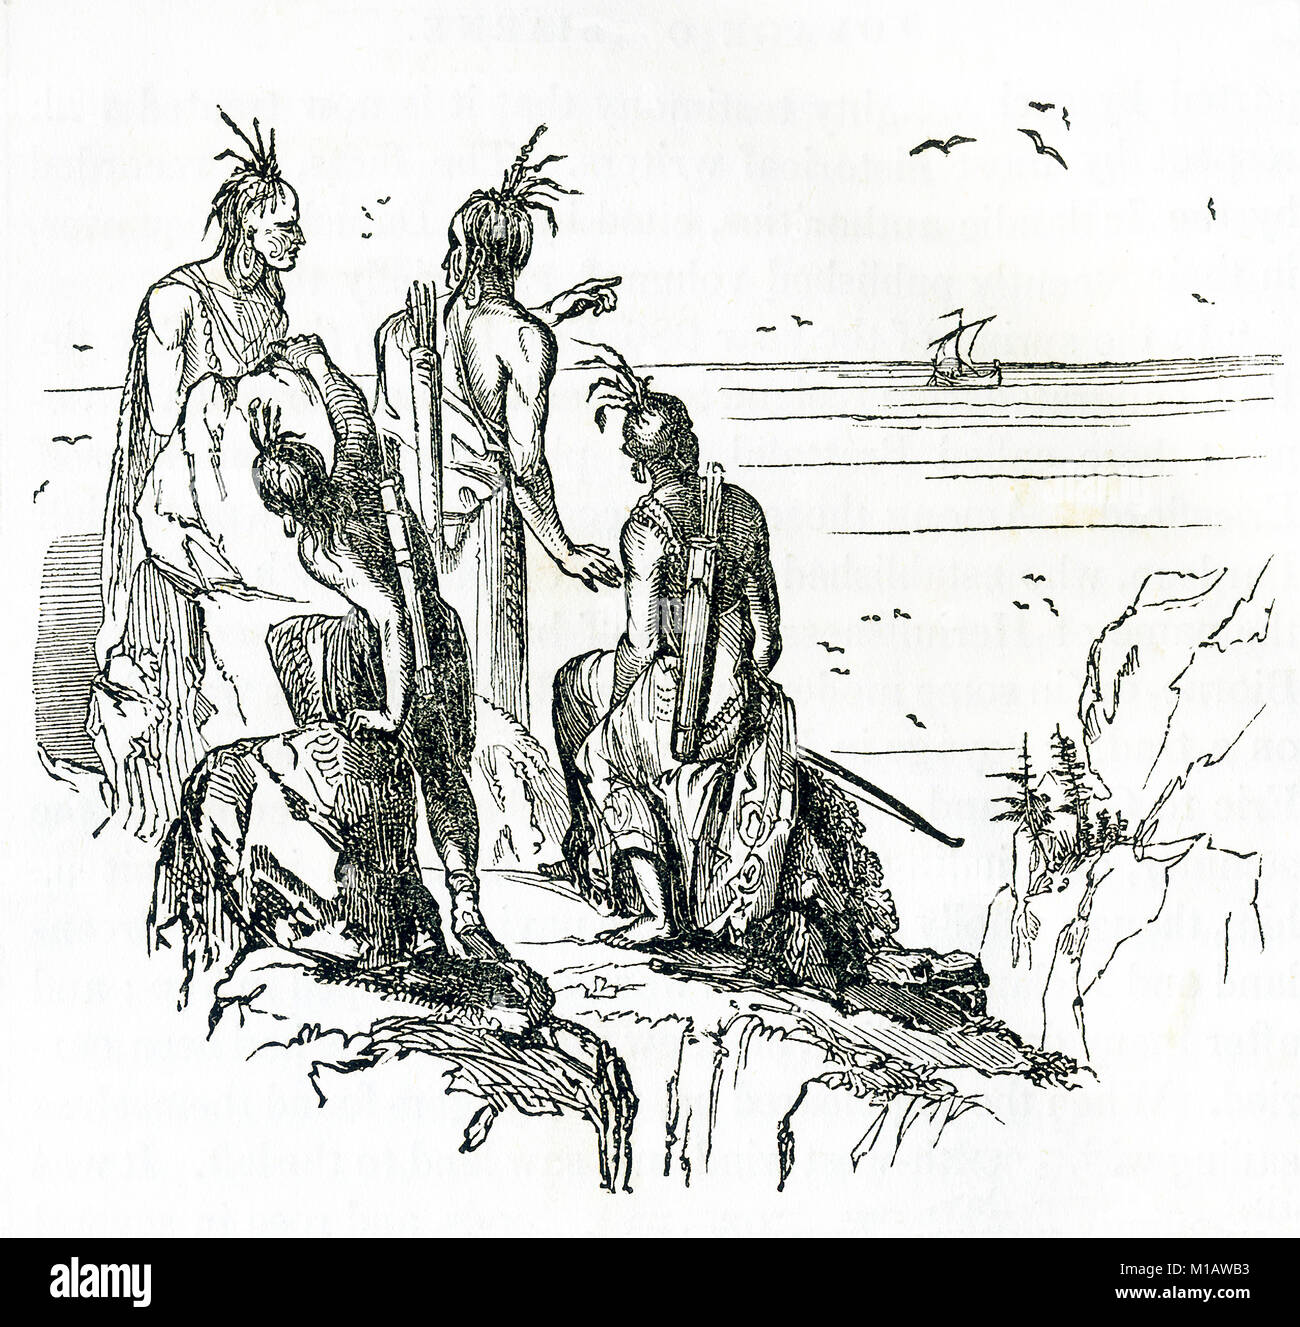 This illustration dates to around 1846 and shows Indians, or Native Americans, watching as English boats approach their shores with prospective settlers and explorers. Stock Photo